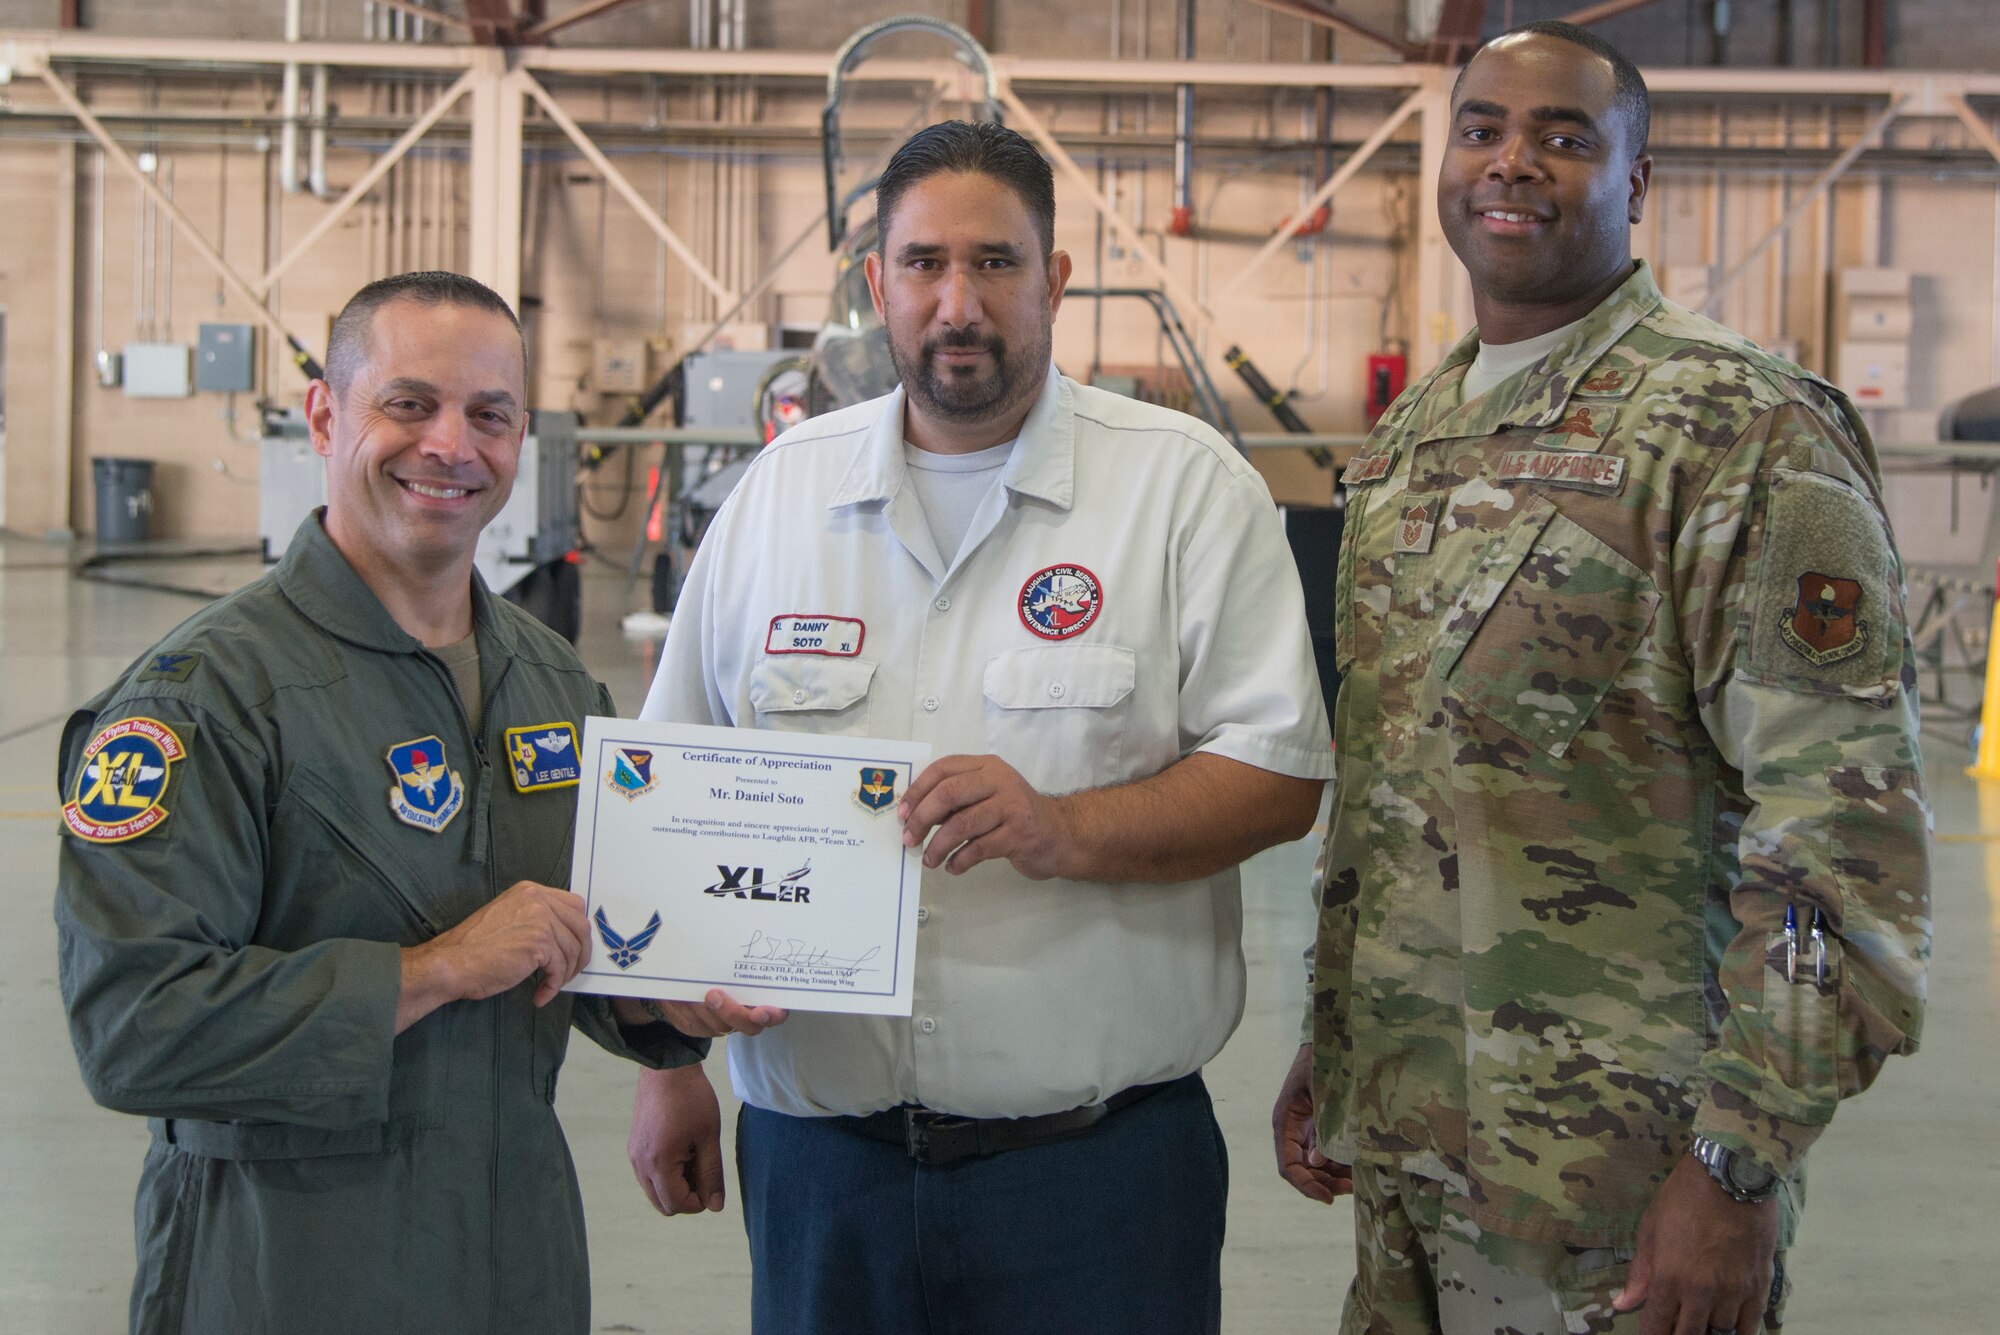 Daniel Soto, a 47th Maintenance Directorate aircraft maintenance supervisor, receives an award from Col. Lee Gentile, 47th Flying Training Wing commander, and Command Chief Master Sgt. Robert Zackery III, 47th FTW command chief at Laughlin Air Force Base, Texas, Oct. 3, 2019. Soto was chosen by wing leadership to be the “XLer of the Week” of Sept. 30, 2019. (U.S. Air Force photo by Senior Airman Daniel Hambor)